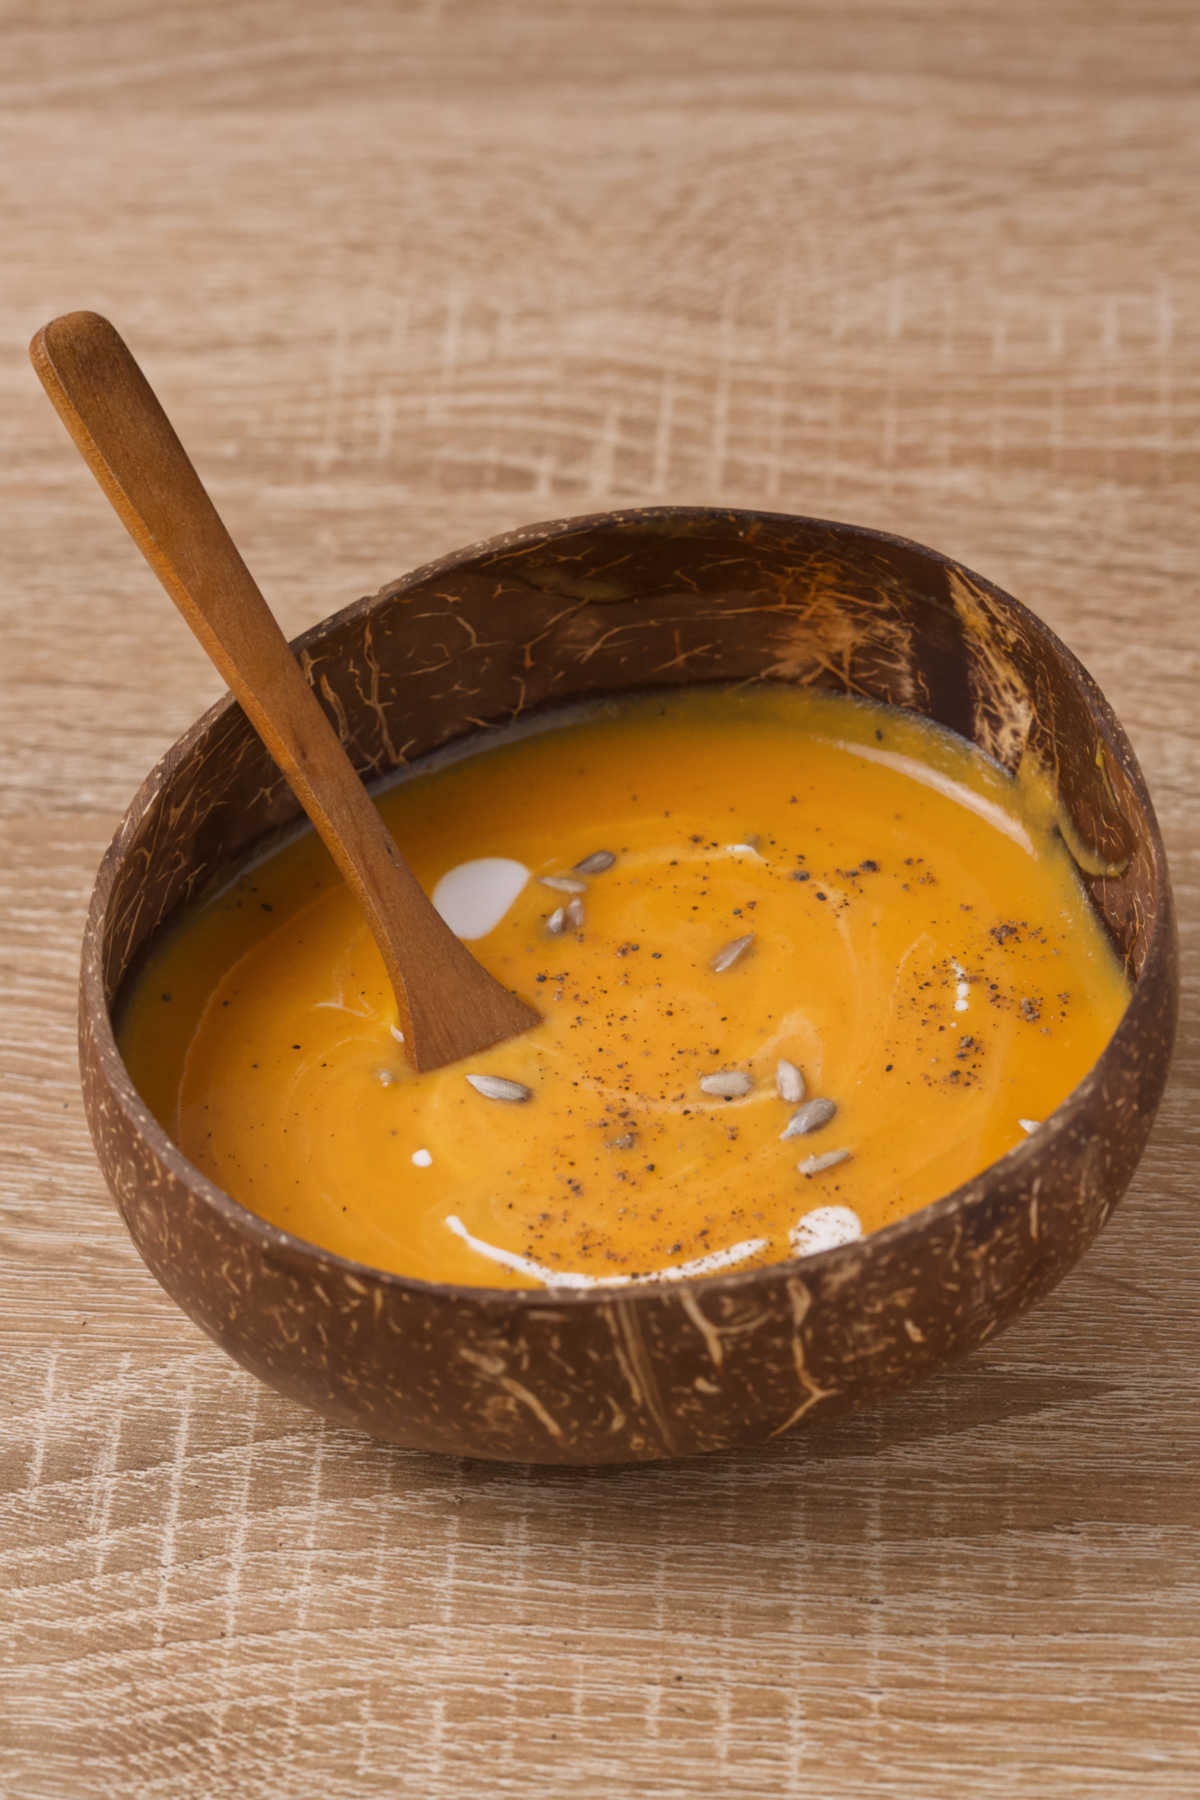 Soup in a wooden bowl with a wooden spoon on a wooden table.